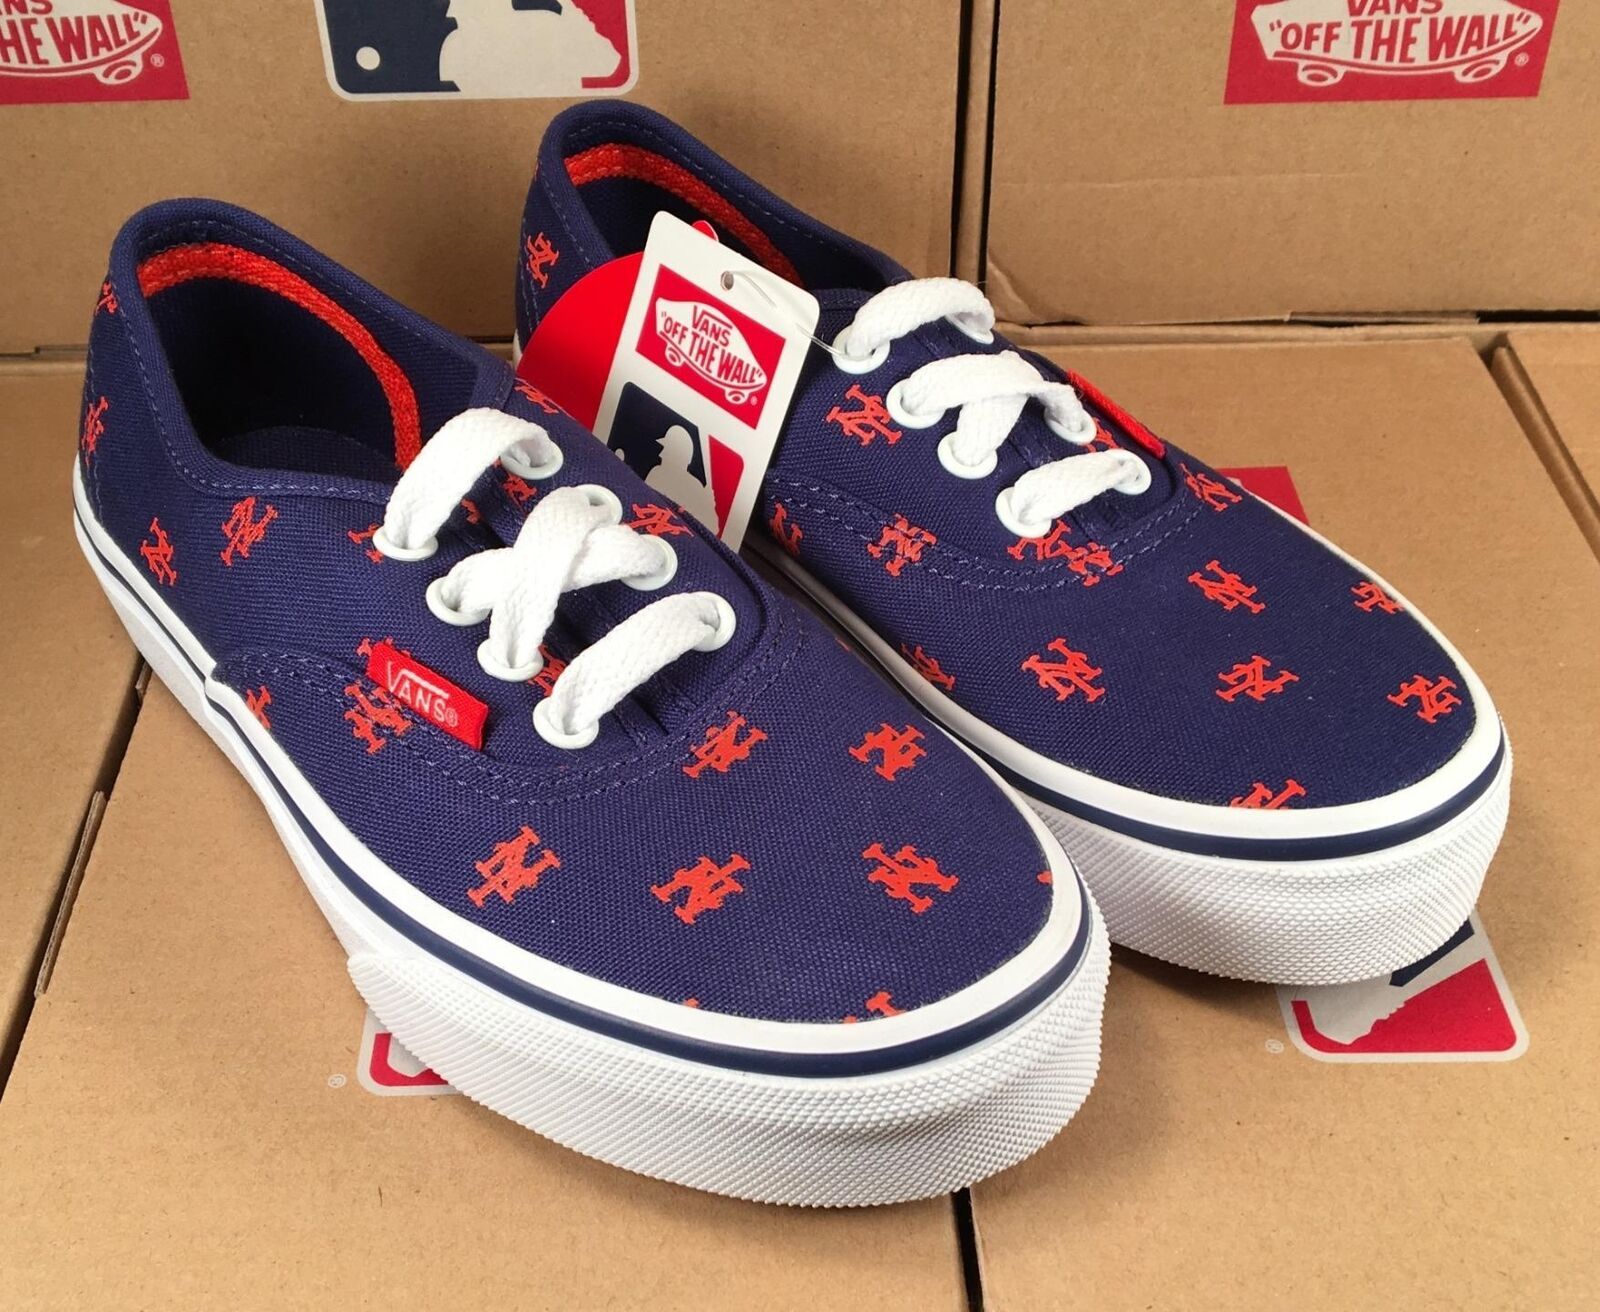 Vans KIDS New York Mets MLB Authentic Sneaker Limited Edition Shoes ...